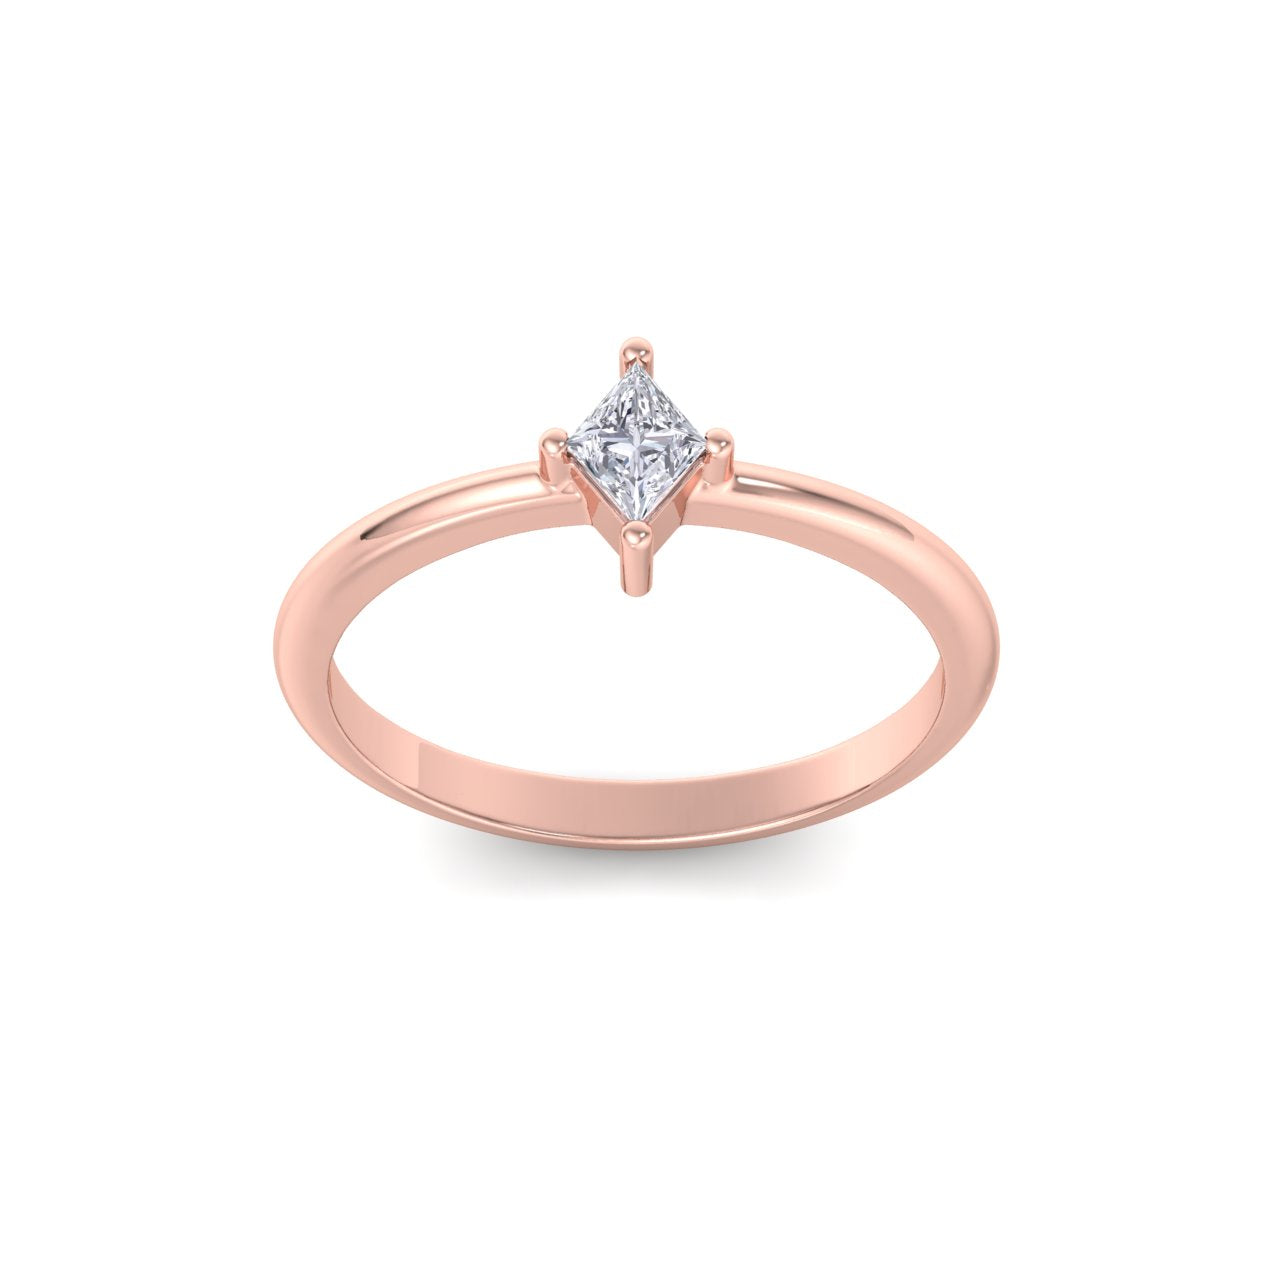 Petite Diamond ring in rose gold with white diamonds of 0.25 ct in weight